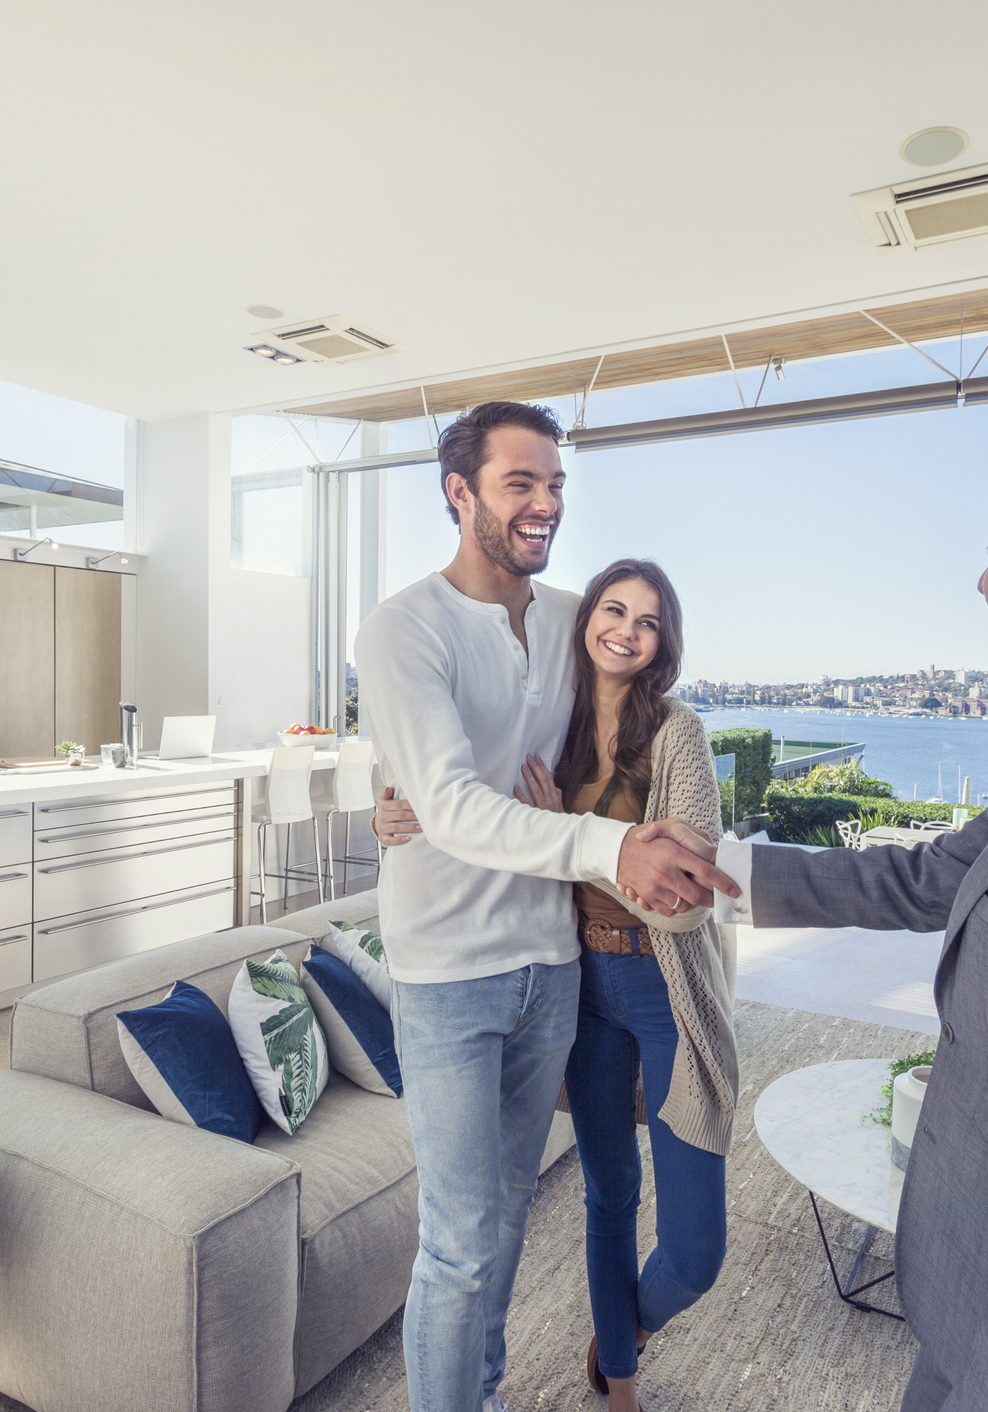 Real estate agent with couple in luxury home. They are shaking hands. There is a water view, kitchen and living room in the background. Couple are casually dressed. They are laughing. Agent is dressed in a suit and smiling. Wide angle.